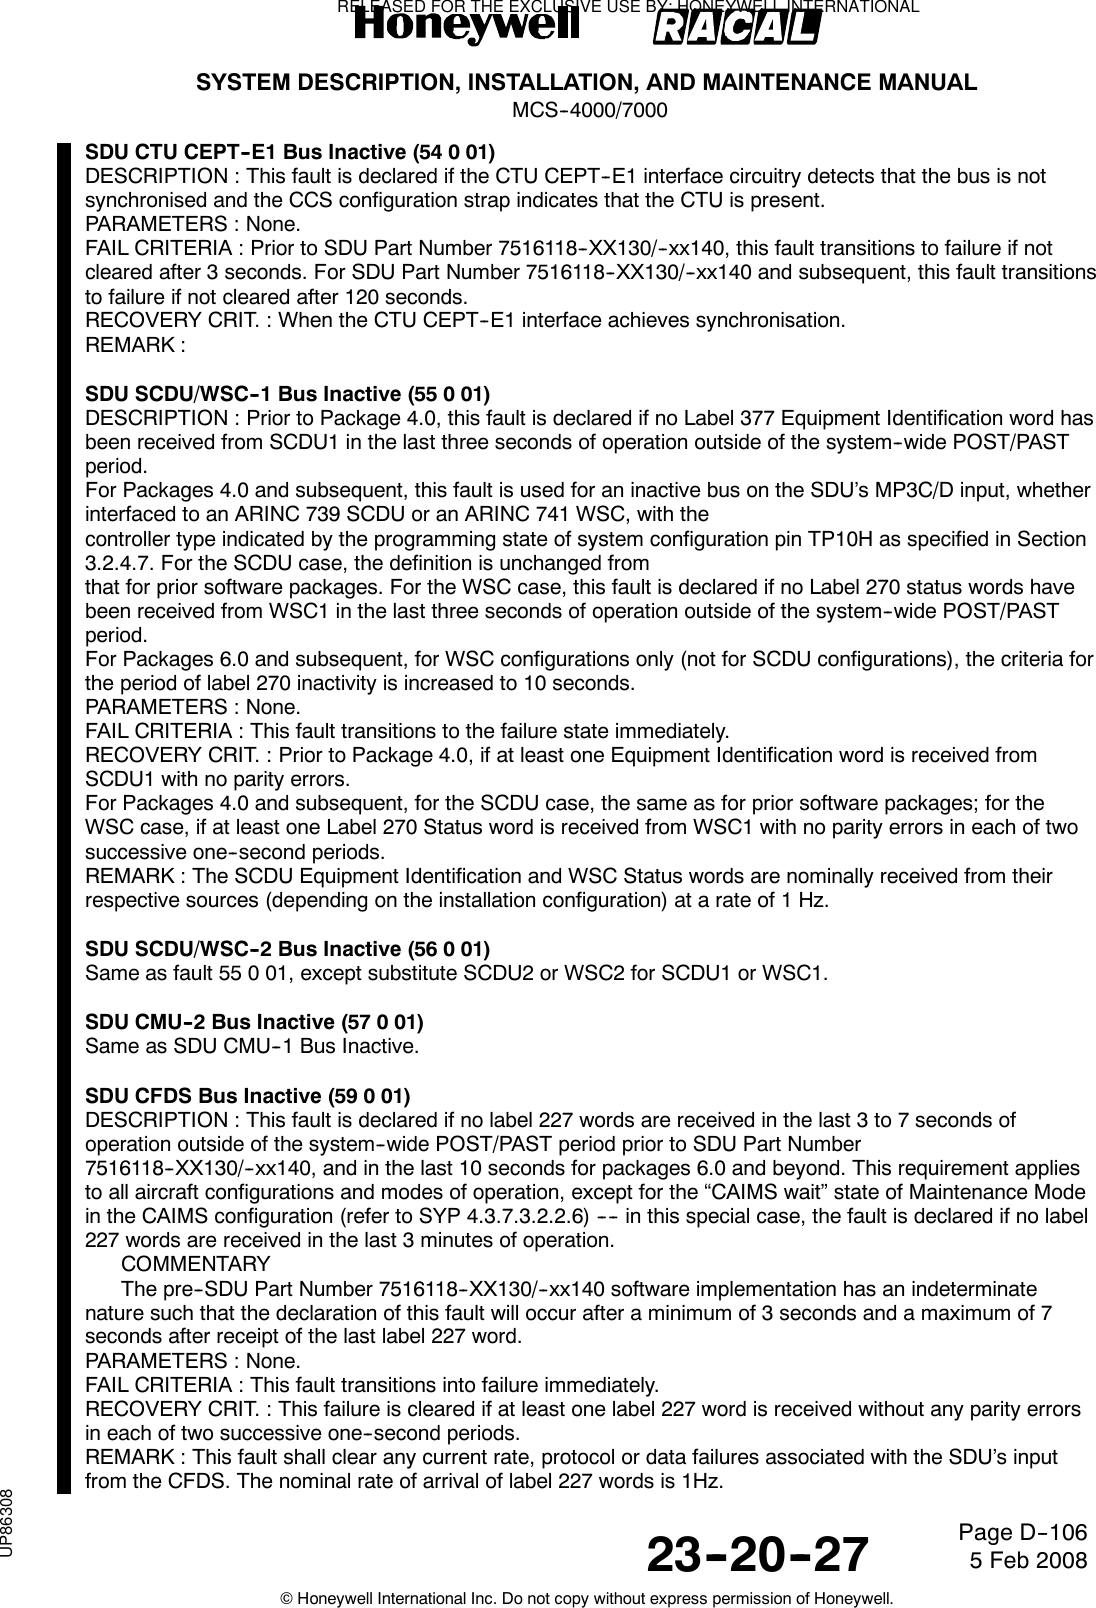 SYSTEM DESCRIPTION, INSTALLATION, AND MAINTENANCE MANUALMCS--4000/700023--20--27 5 Feb 2008©Honeywell International Inc. Do not copy without express permission of Honeywell.Page D--106SDU CTU CEPT--E1 Bus Inactive (54 0 01)DESCRIPTION : This fault is declared if the CTU CEPT--E1 interface circuitry detects that the bus is notsynchronised and the CCS configuration strap indicates that the CTU is present.PARAMETERS : None.FAIL CRITERIA : Prior to SDU Part Number 7516118--XX130/--xx140, this fault transitions to failure if notcleared after 3 seconds. For SDU Part Number 7516118--XX130/--xx140 and subsequent, this fault transitionsto failure if not cleared after 120 seconds.RECOVERY CRIT. : When the CTU CEPT--E1 interface achieves synchronisation.REMARK :SDU SCDU/WSC--1 Bus Inactive (55 0 01)DESCRIPTION : Prior to Package 4.0, this fault is declared if no Label 377 Equipment Identification word hasbeen received from SCDU1 in the last three seconds of operation outside of the system--wide POST/PASTperiod.For Packages 4.0 and subsequent, this fault is used for an inactive bus on the SDU’s MP3C/D input, whetherinterfaced to an ARINC 739 SCDU or an ARINC 741 WSC, with thecontroller type indicated by the programming state of system configuration pin TP10H as specified in Section3.2.4.7. For the SCDU case, the definition is unchanged fromthat for prior software packages. For the WSC case, this fault is declared if no Label 270 status words havebeen received from WSC1 in the last three seconds of operation outside of the system--wide POST/PASTperiod.For Packages 6.0 and subsequent, for WSC configurations only (not for SCDU configurations), the criteria forthe period of label 270 inactivity is increased to 10 seconds.PARAMETERS : None.FAIL CRITERIA : This fault transitions to the failure state immediately.RECOVERY CRIT. : Prior to Package 4.0, if at least one Equipment Identification word is received fromSCDU1 with no parity errors.For Packages 4.0 and subsequent, for the SCDU case, the same as for prior software packages; for theWSC case, if at least one Label 270 Status word is received from WSC1 with no parity errors in each of twosuccessive one--second periods.REMARK : The SCDU Equipment Identification and WSC Status words are nominally received from theirrespective sources (depending on the installation configuration) at a rate of 1 Hz.SDU SCDU/WSC--2 Bus Inactive (56 0 01)Same as fault 55 0 01, except substitute SCDU2 or WSC2 for SCDU1 or WSC1.SDU CMU--2 Bus Inactive (57 0 01)Same as SDU CMU--1 Bus Inactive.SDU CFDS Bus Inactive (59 0 01)DESCRIPTION : This fault is declared if no label 227 words are received in the last 3 to 7 seconds ofoperation outside of the system--wide POST/PAST period prior to SDU Part Number7516118--XX130/--xx140, and in the last 10 seconds for packages 6.0 and beyond. This requirement appliesto all aircraft configurations and modes of operation, except for the “CAIMS wait” state of Maintenance Modein the CAIMS configuration (refer to SYP 4.3.7.3.2.2.6) ---- in this special case, the fault is declared if no label227 words are received in the last 3 minutes of operation.COMMENTARYThe pre--SDU Part Number 7516118--XX130/--xx140 software implementation has an indeterminatenature such that the declaration of this fault will occur after a minimum of 3 seconds and a maximum of 7seconds after receipt of the last label 227 word.PARAMETERS : None.FAIL CRITERIA : This fault transitions into failure immediately.RECOVERY CRIT. : This failure is cleared if at least one label 227 word is received without any parity errorsin each of two successive one--second periods.REMARK : This fault shall clear any current rate, protocol or data failures associated with the SDU’s inputfrom the CFDS. The nominal rate of arrival of label 227 words is 1Hz.RELEASED FOR THE EXCLUSIVE USE BY: HONEYWELL INTERNATIONALUP86308